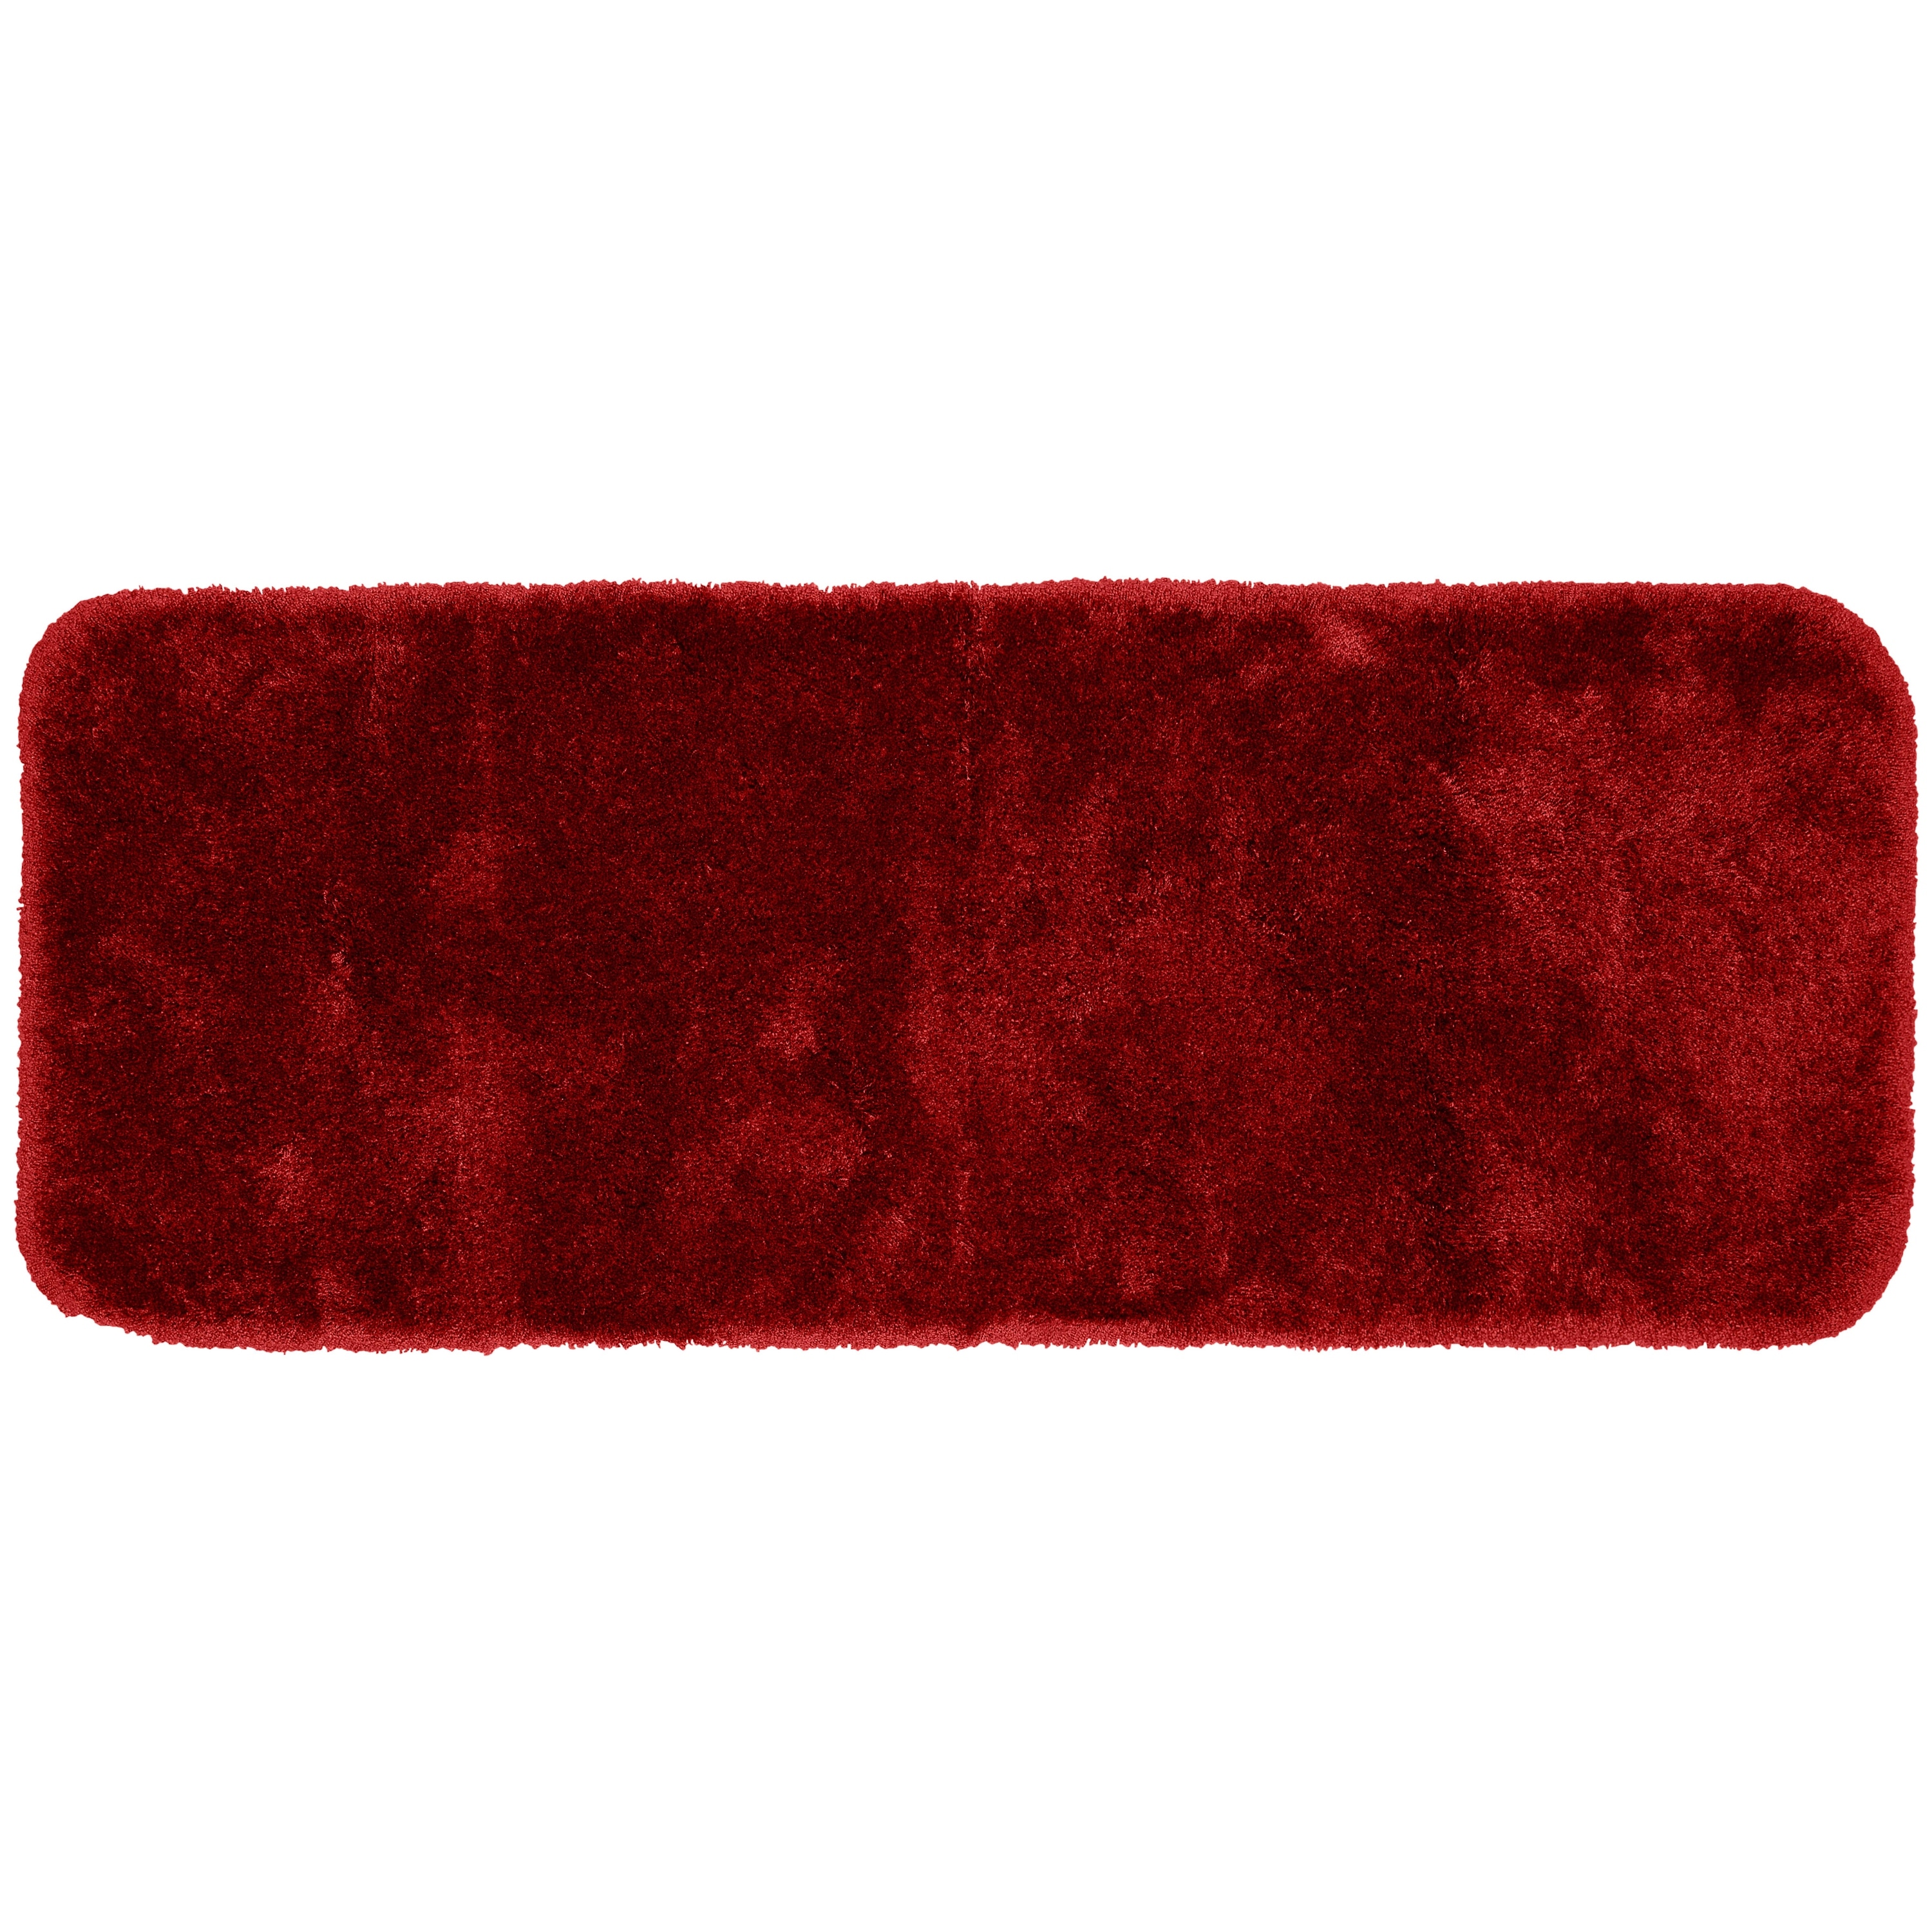 https://ak1.ostkcdn.com/images/products/is/images/direct/704ce9757f3d4a59771be1e7f67bcf7eff55ba6b/Finest-Luxury-Chili-Red-Ultra-Plush-Washable-Bath-Rug-Runner.jpg